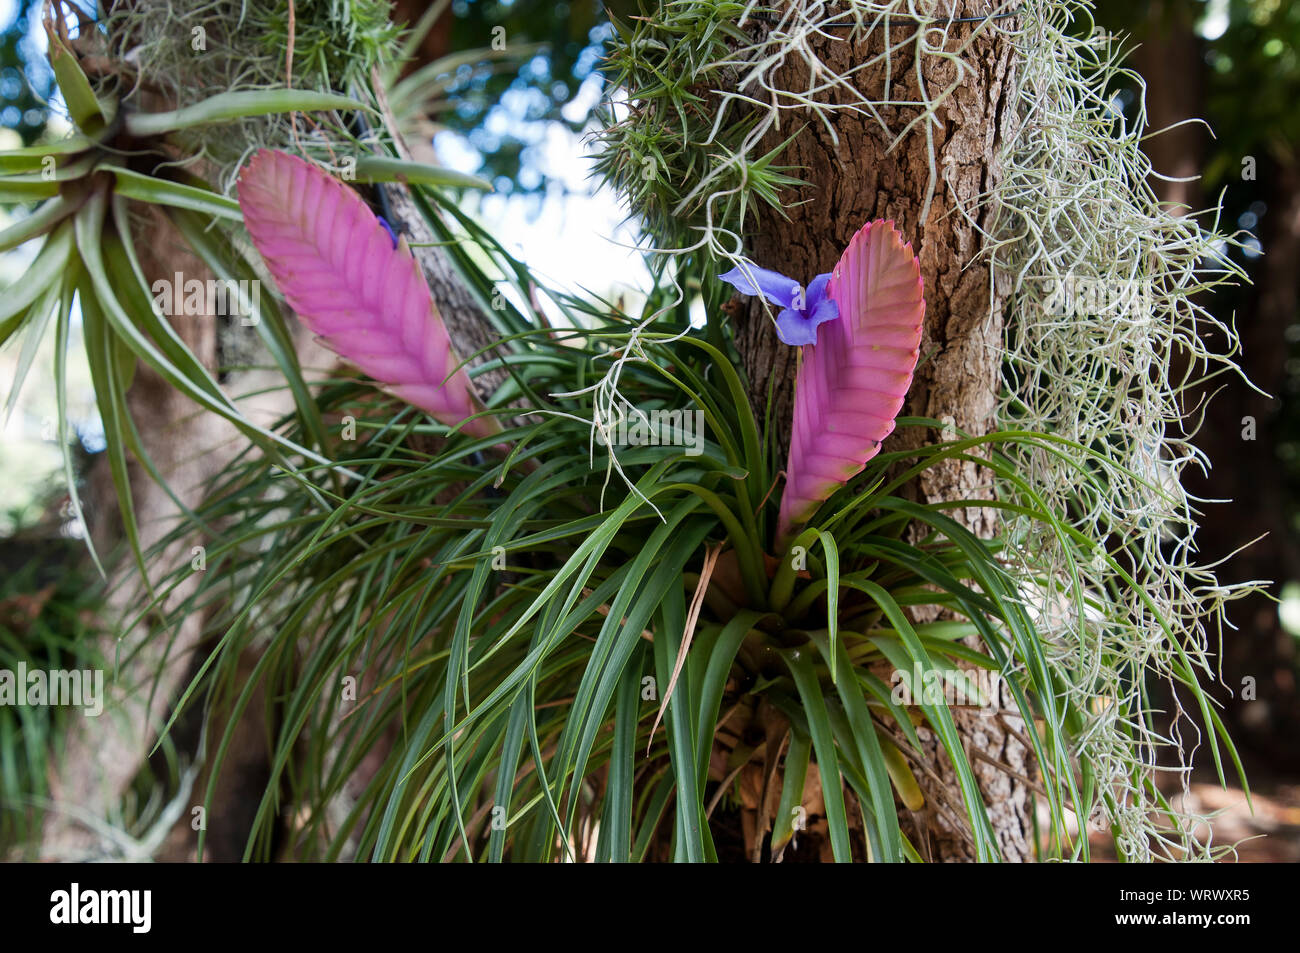 Sydney Australia, quill of  Wallisia cyanea or pink quill plant Stock Photo